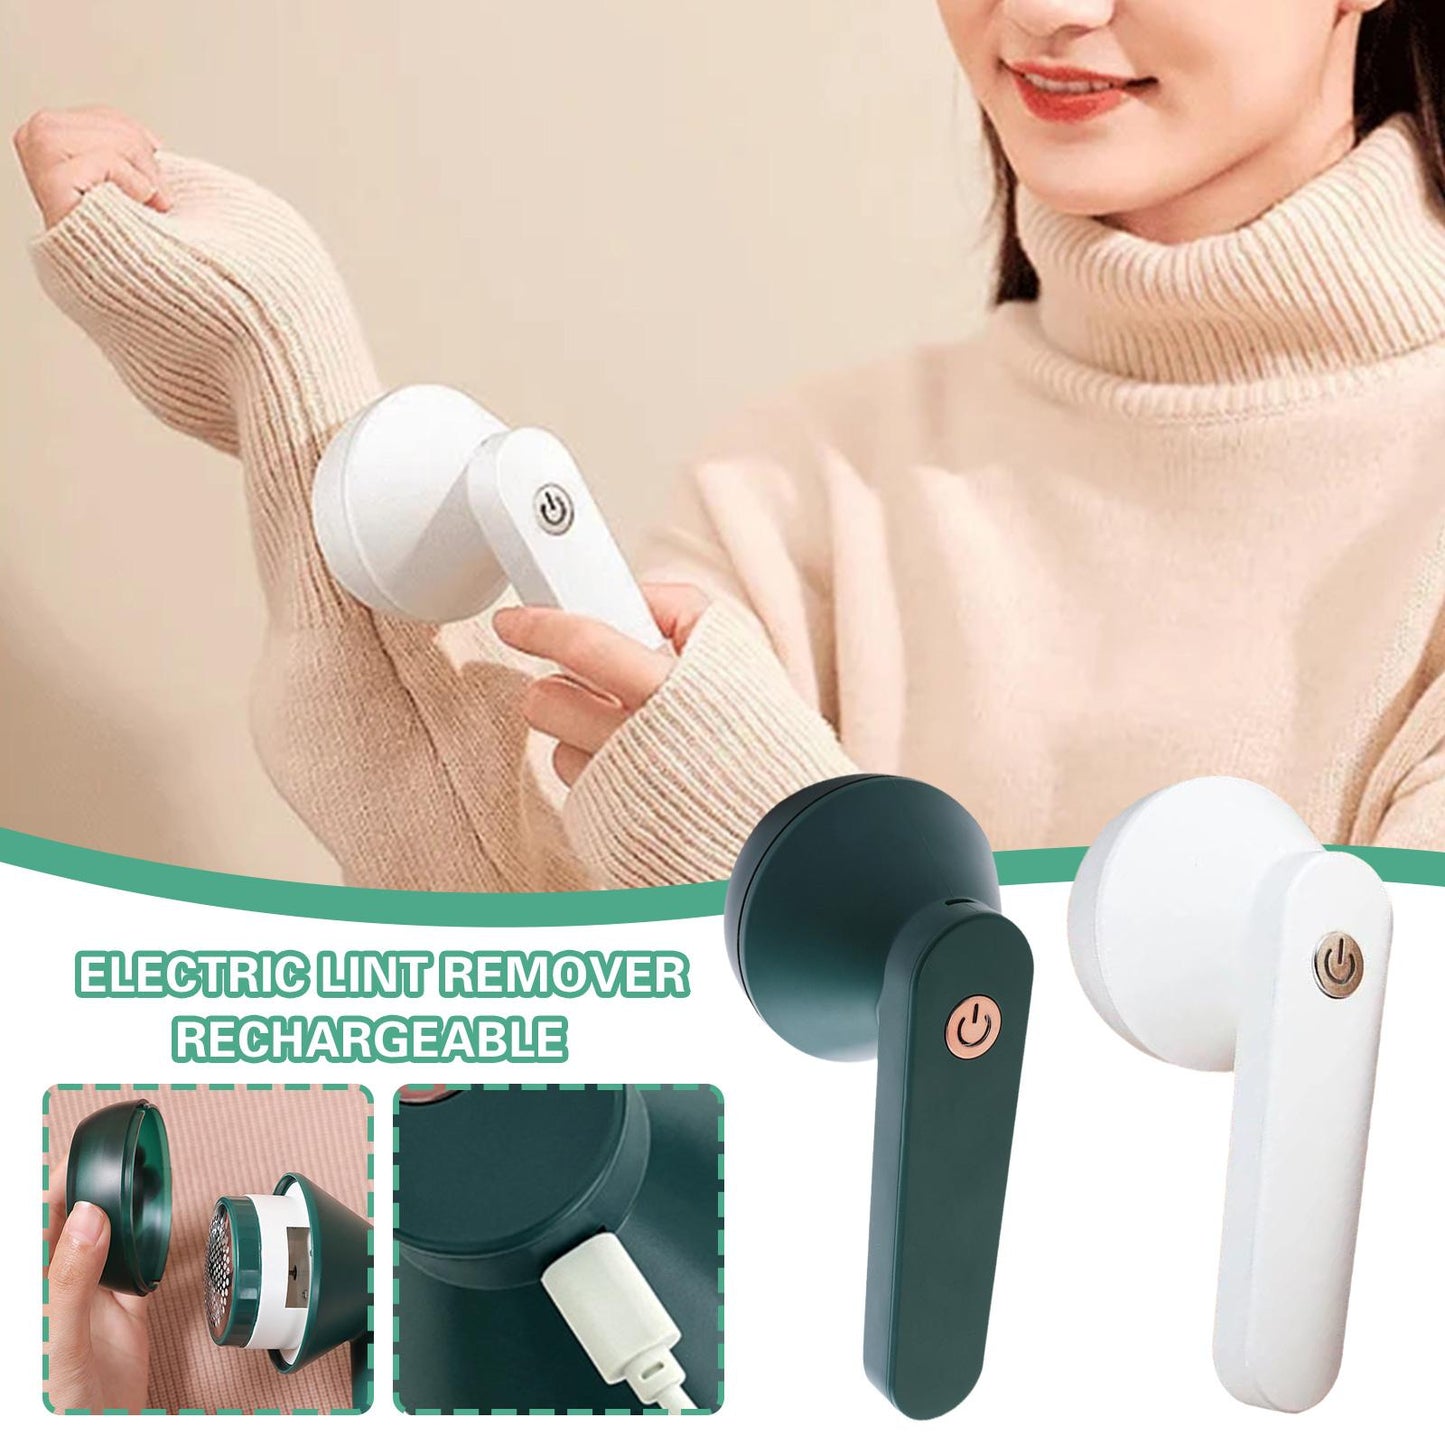 Electric Pellets Lint Remover For Clothing Hair Ball Trimmer Fuzz Clothes Sweater Shaver Spools Removal Device Rechargeable Mary's Mercantile Shoppe